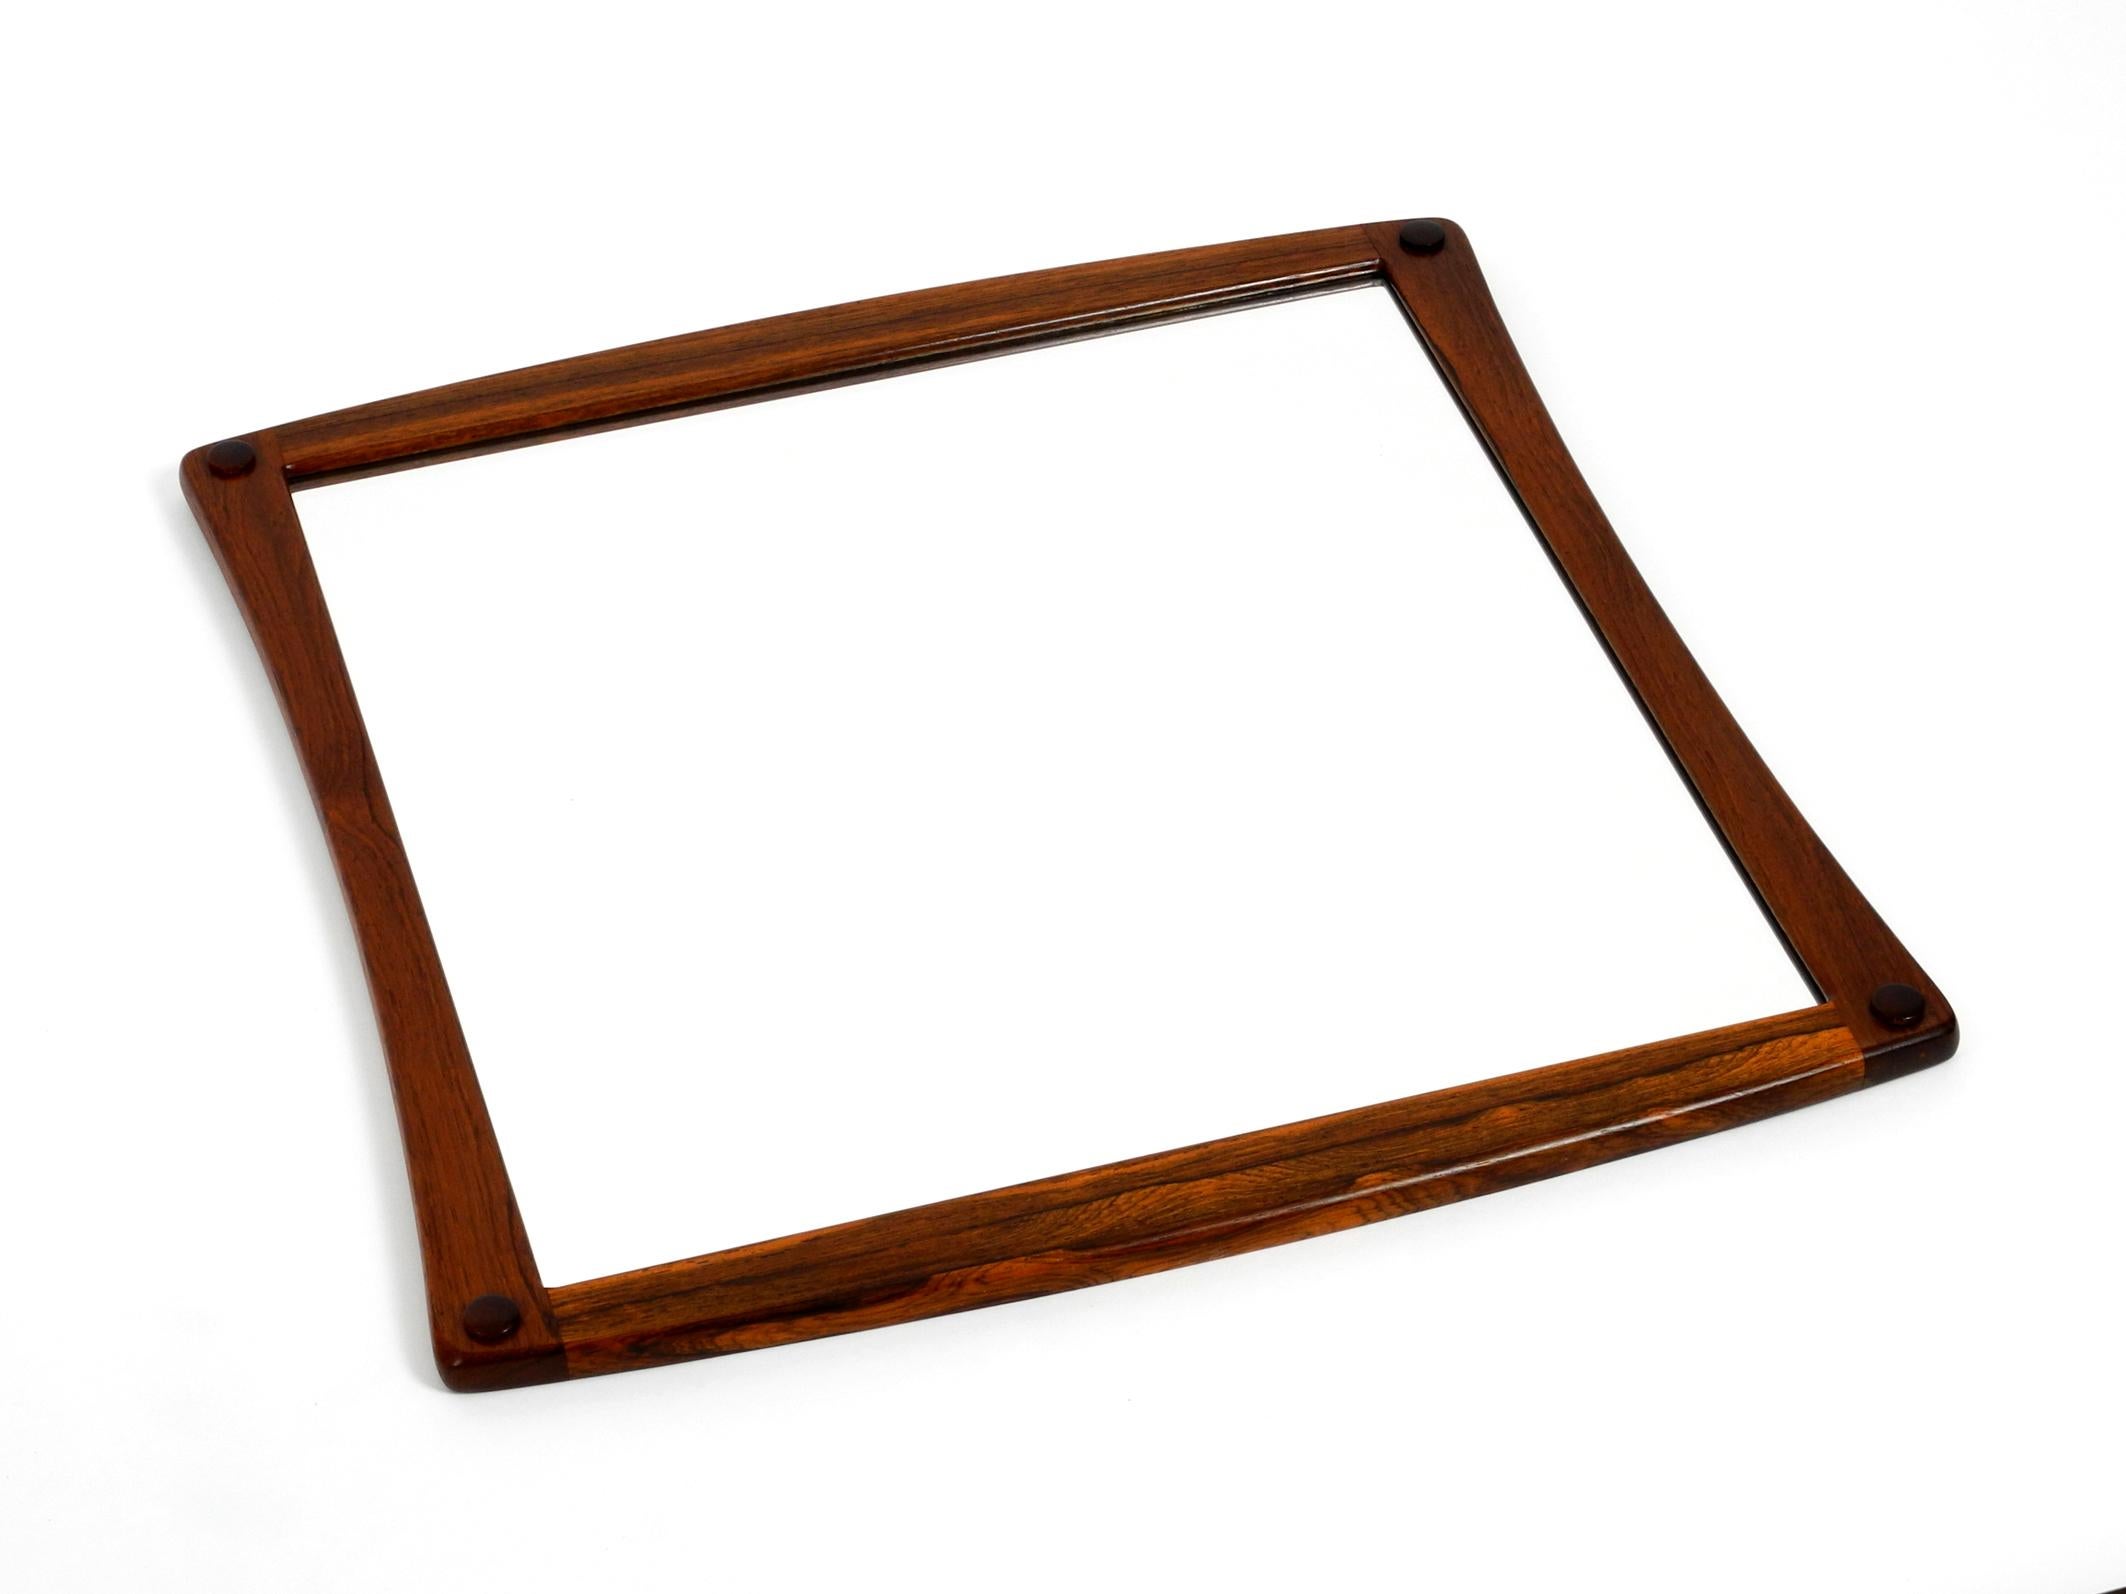 Original 1960s beautiful teak wall mirror in a rare shape.
Designed and manufactured by Aksel Kjersgaard.
All Kjersgaard products were made in the municipality of Odder in Denmark.
Very elaborately manufactured wall mirror made of solid teak with